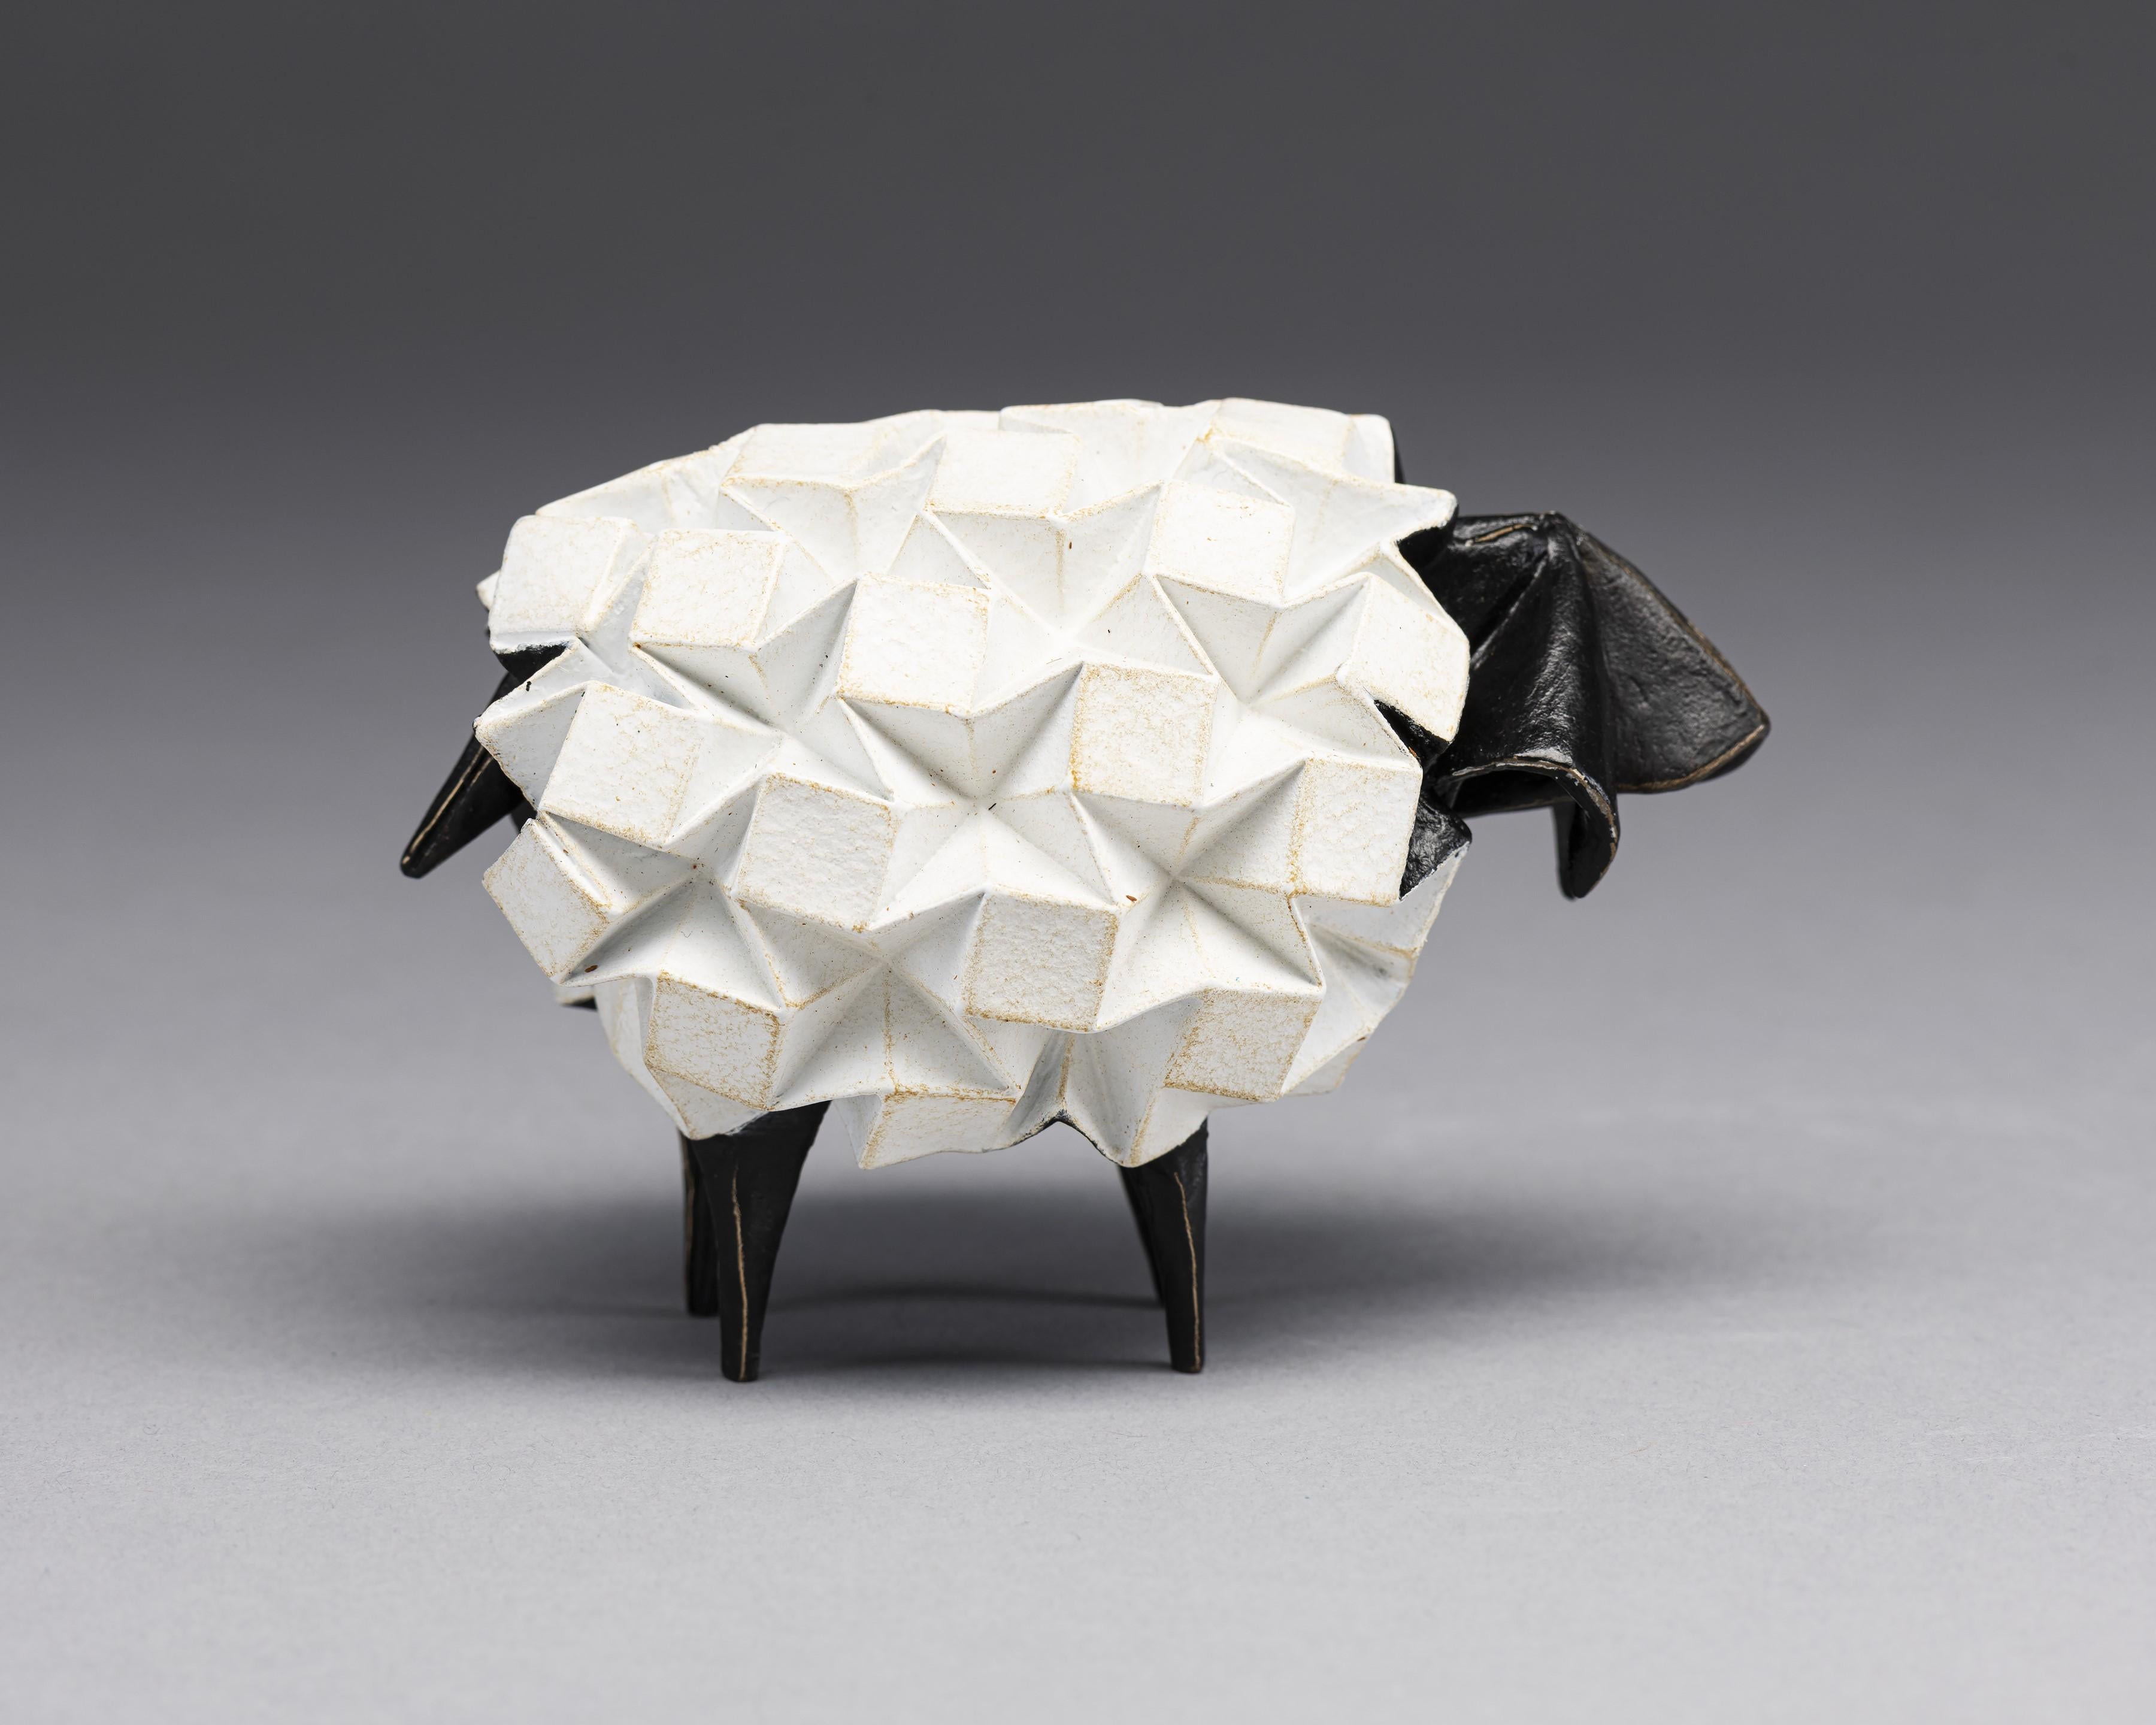 Kevin Box Abstract Sculpture - Ewe and Me (white) 83/500